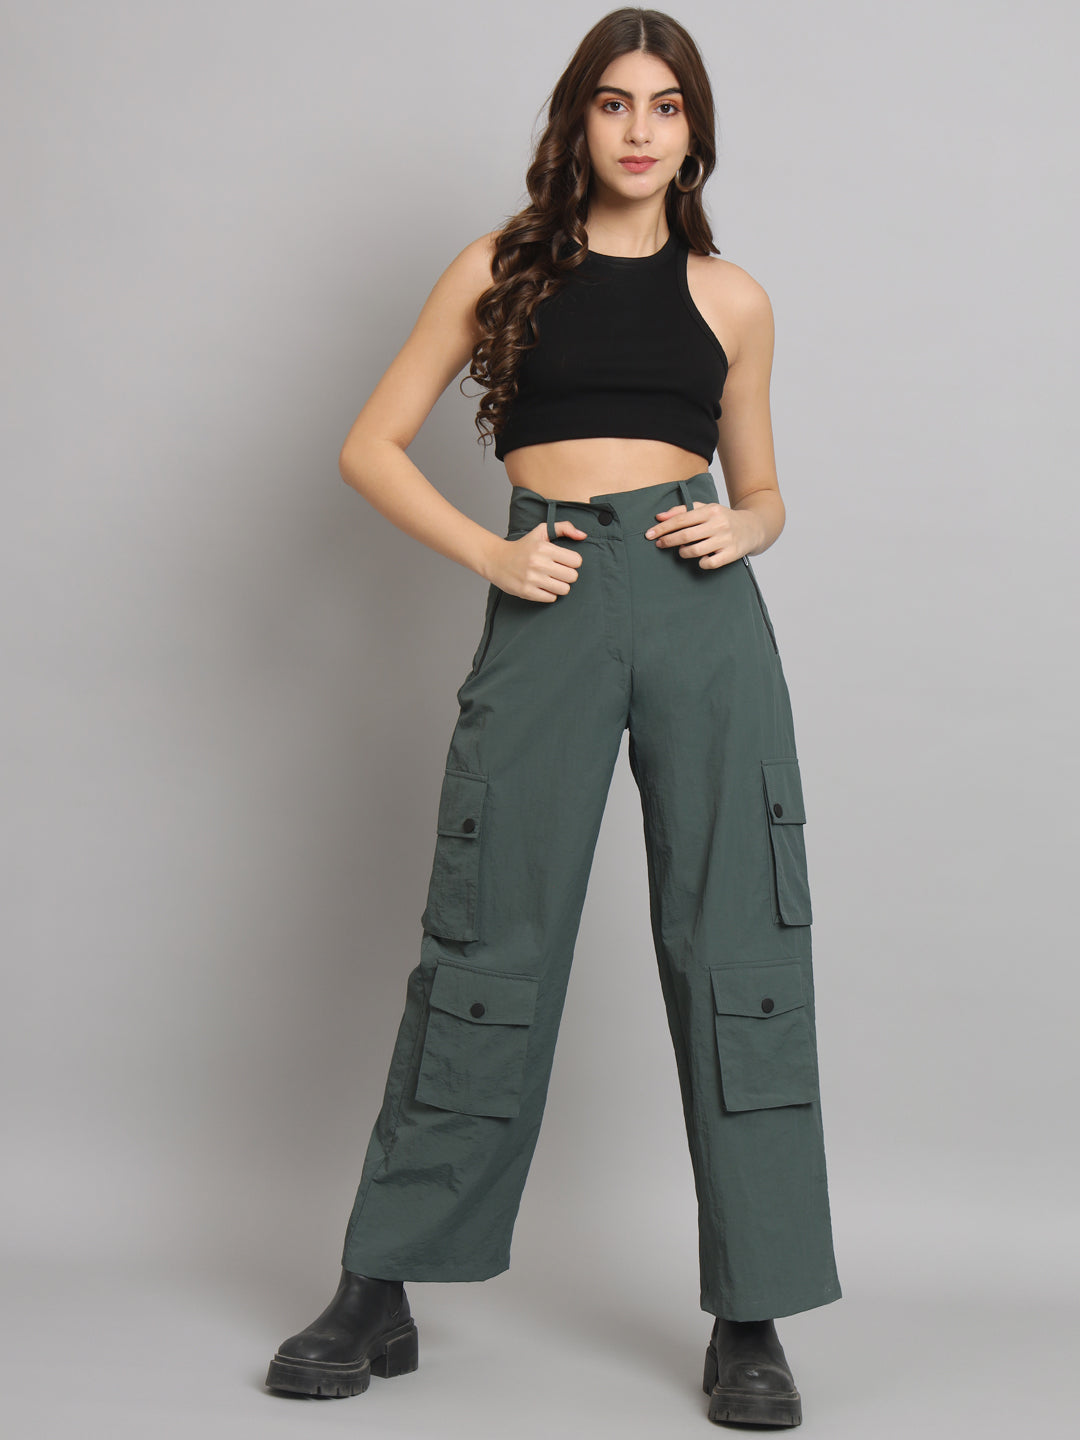 Buy UNISEX Enchanted Forest Bottle Green Cargo Parachute Pants By weave  wardrobe at Best Price In Pakistan